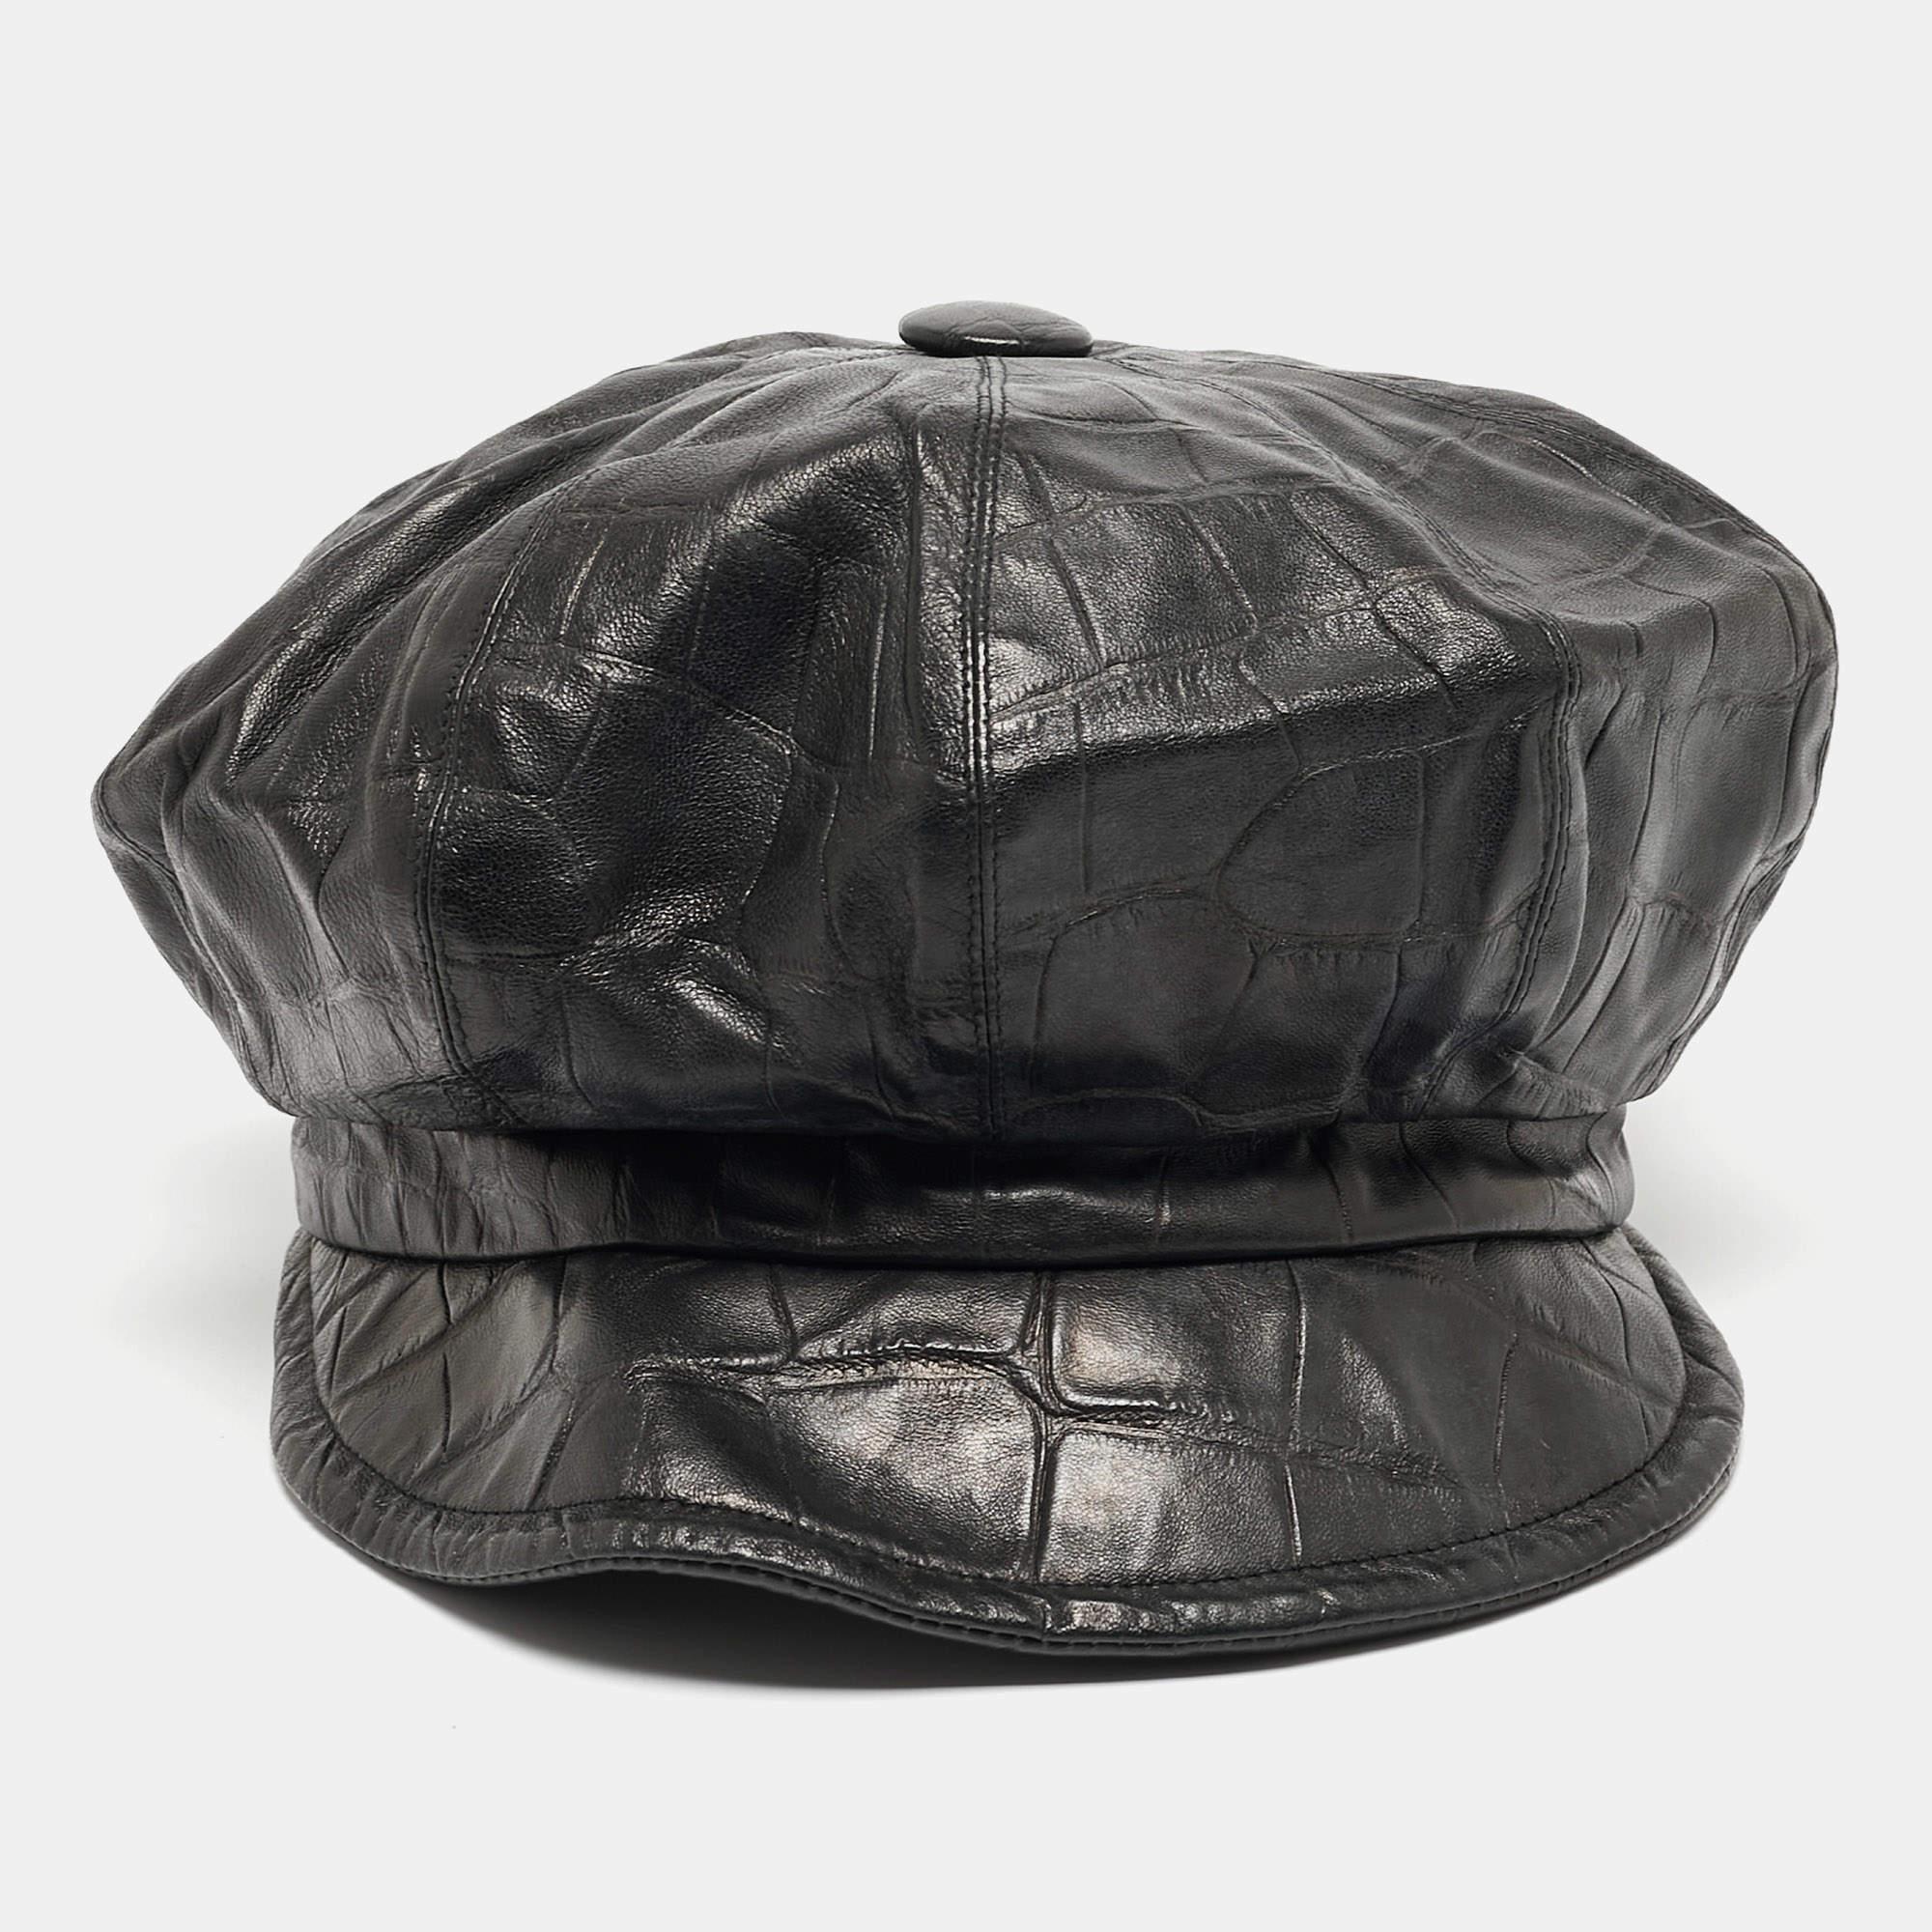 Put the finishing touch to your outfit with this newsboy cap by Dior. This black cap is made from croc-embossed leather and features the brand name on the back.

